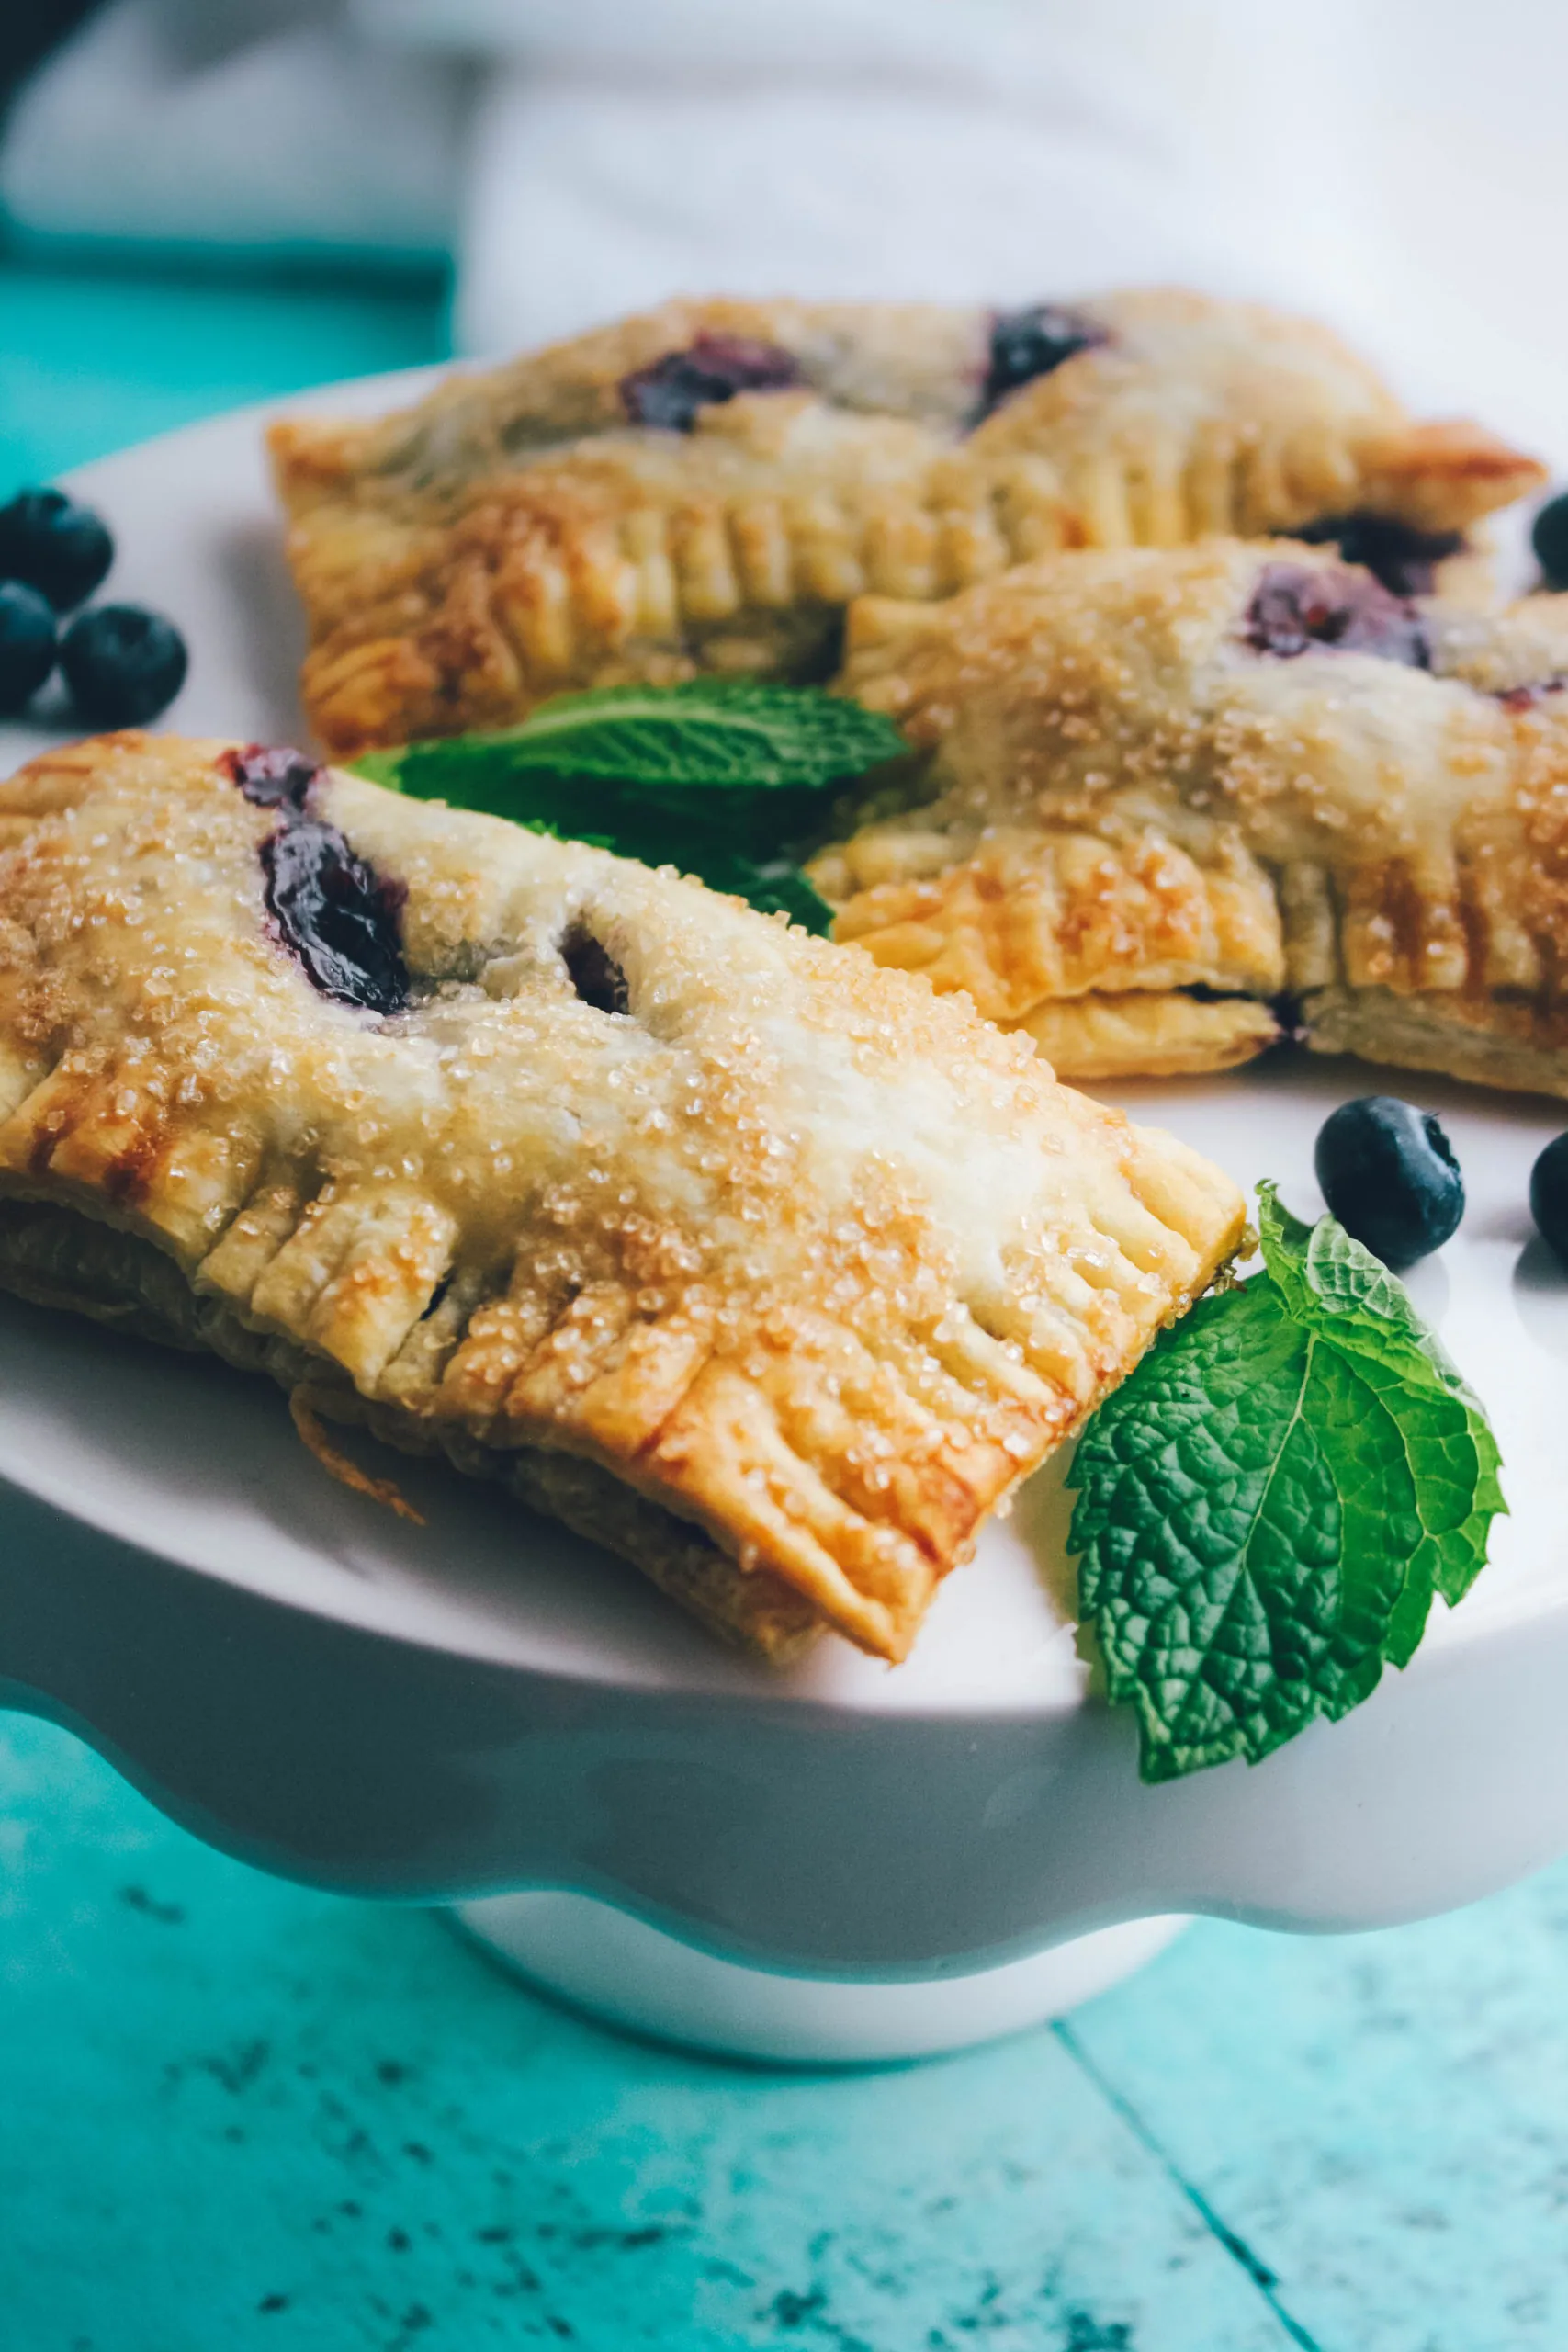 Blueberry Mint Hand Pies need to be on your summer "must-make" dessert list!